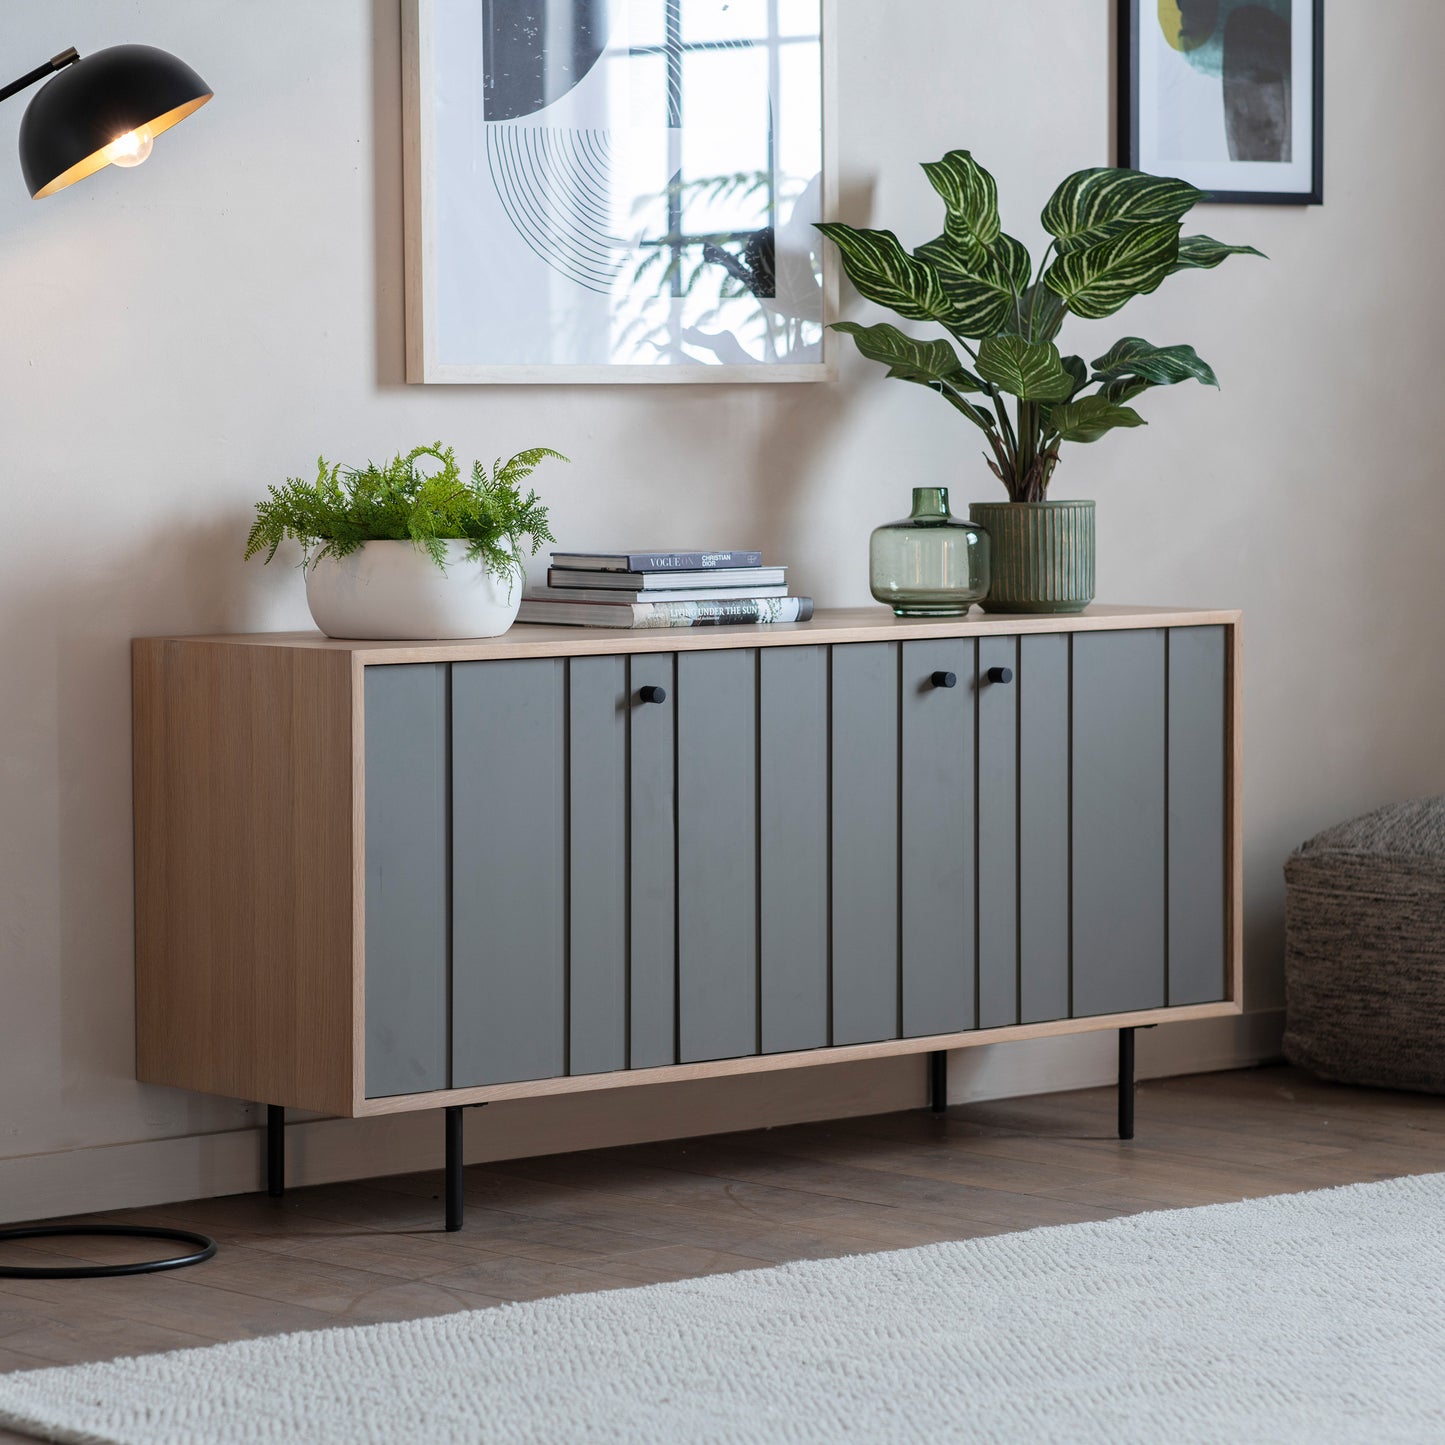 A Sparkwell 3 Door Sideboard 1500x450x700mm by Kikiathome.co.uk, a home furniture piece, enhances the interior decor of a living room with a plant